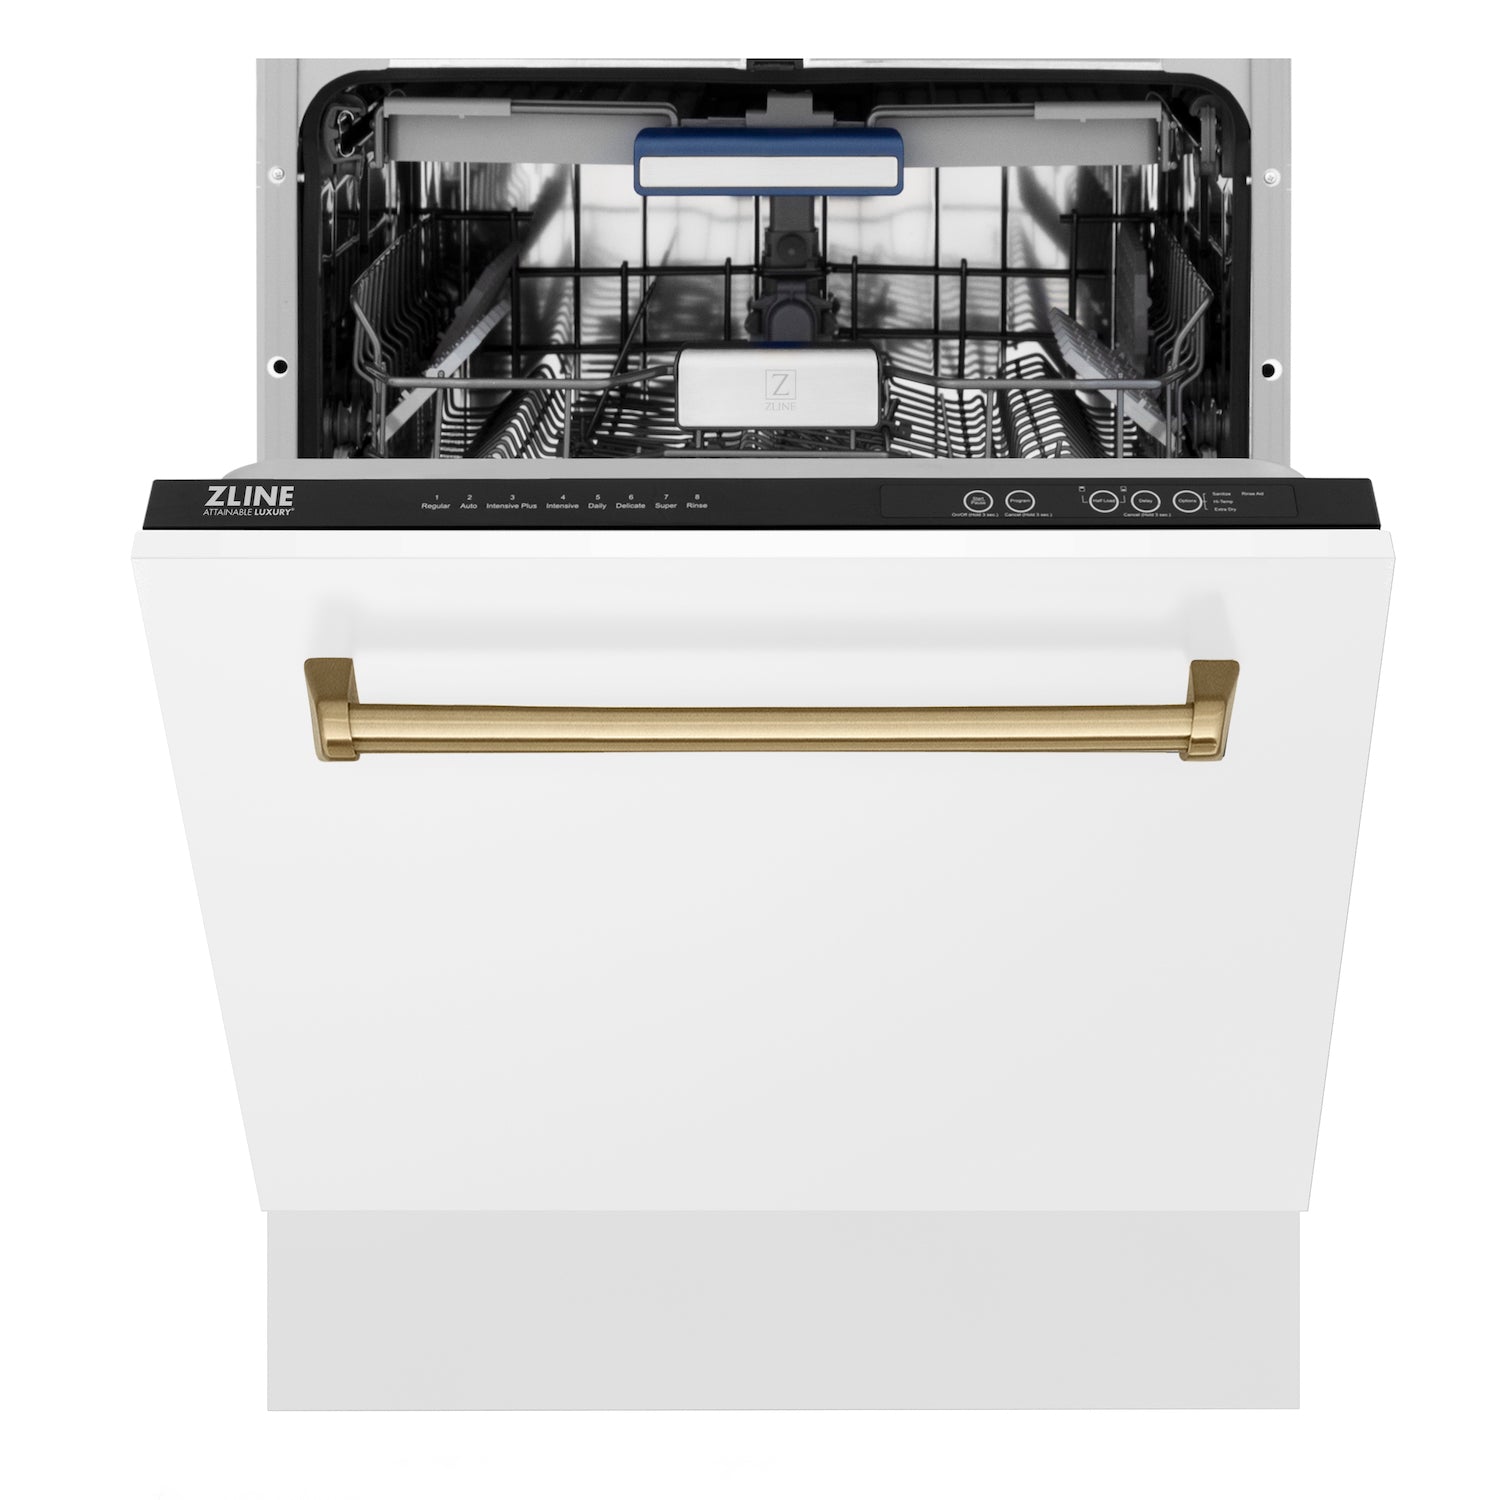 ZLINE Autograph Edition 24 in. 3rd Rack Top Control Tall Tub Dishwasher in White Matte with Champagne Bronze Accent Handle, 51dBa (DWVZ-WM-24-CB)